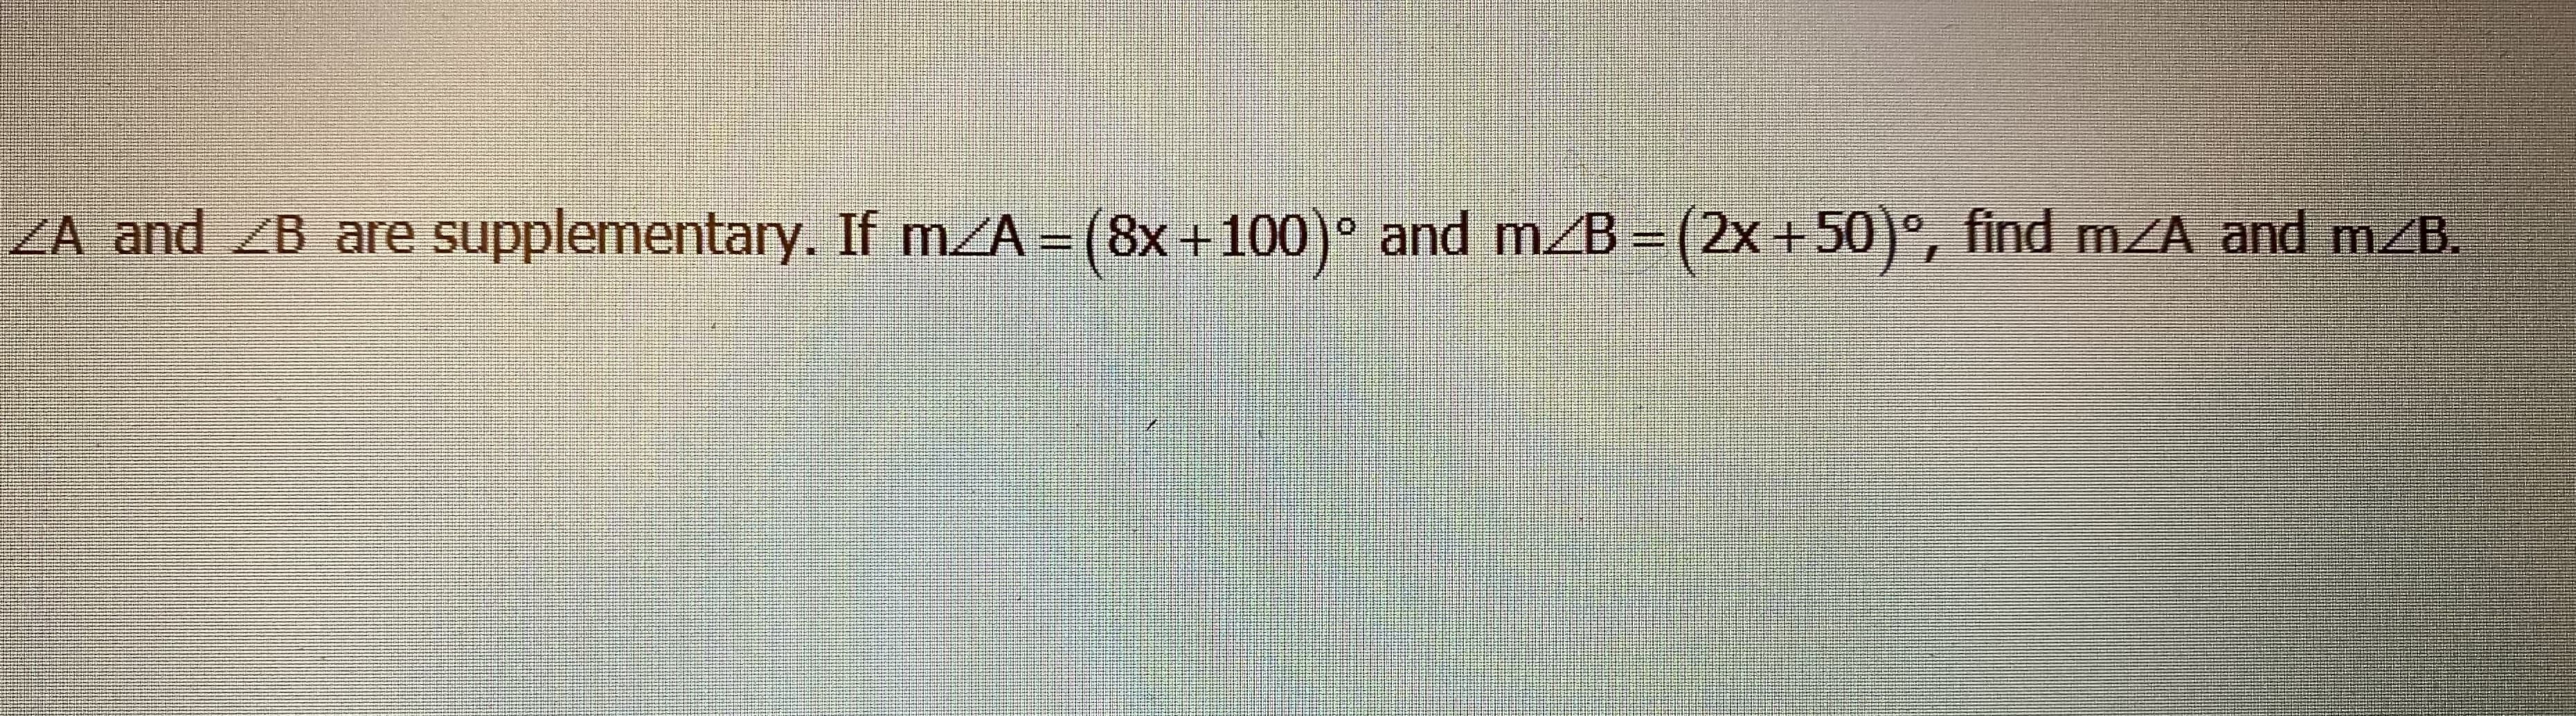 ZA and ZB are supplementary. If mZA = (8x+100)° and m B=(2x+50)°, find m/A and m/B.
